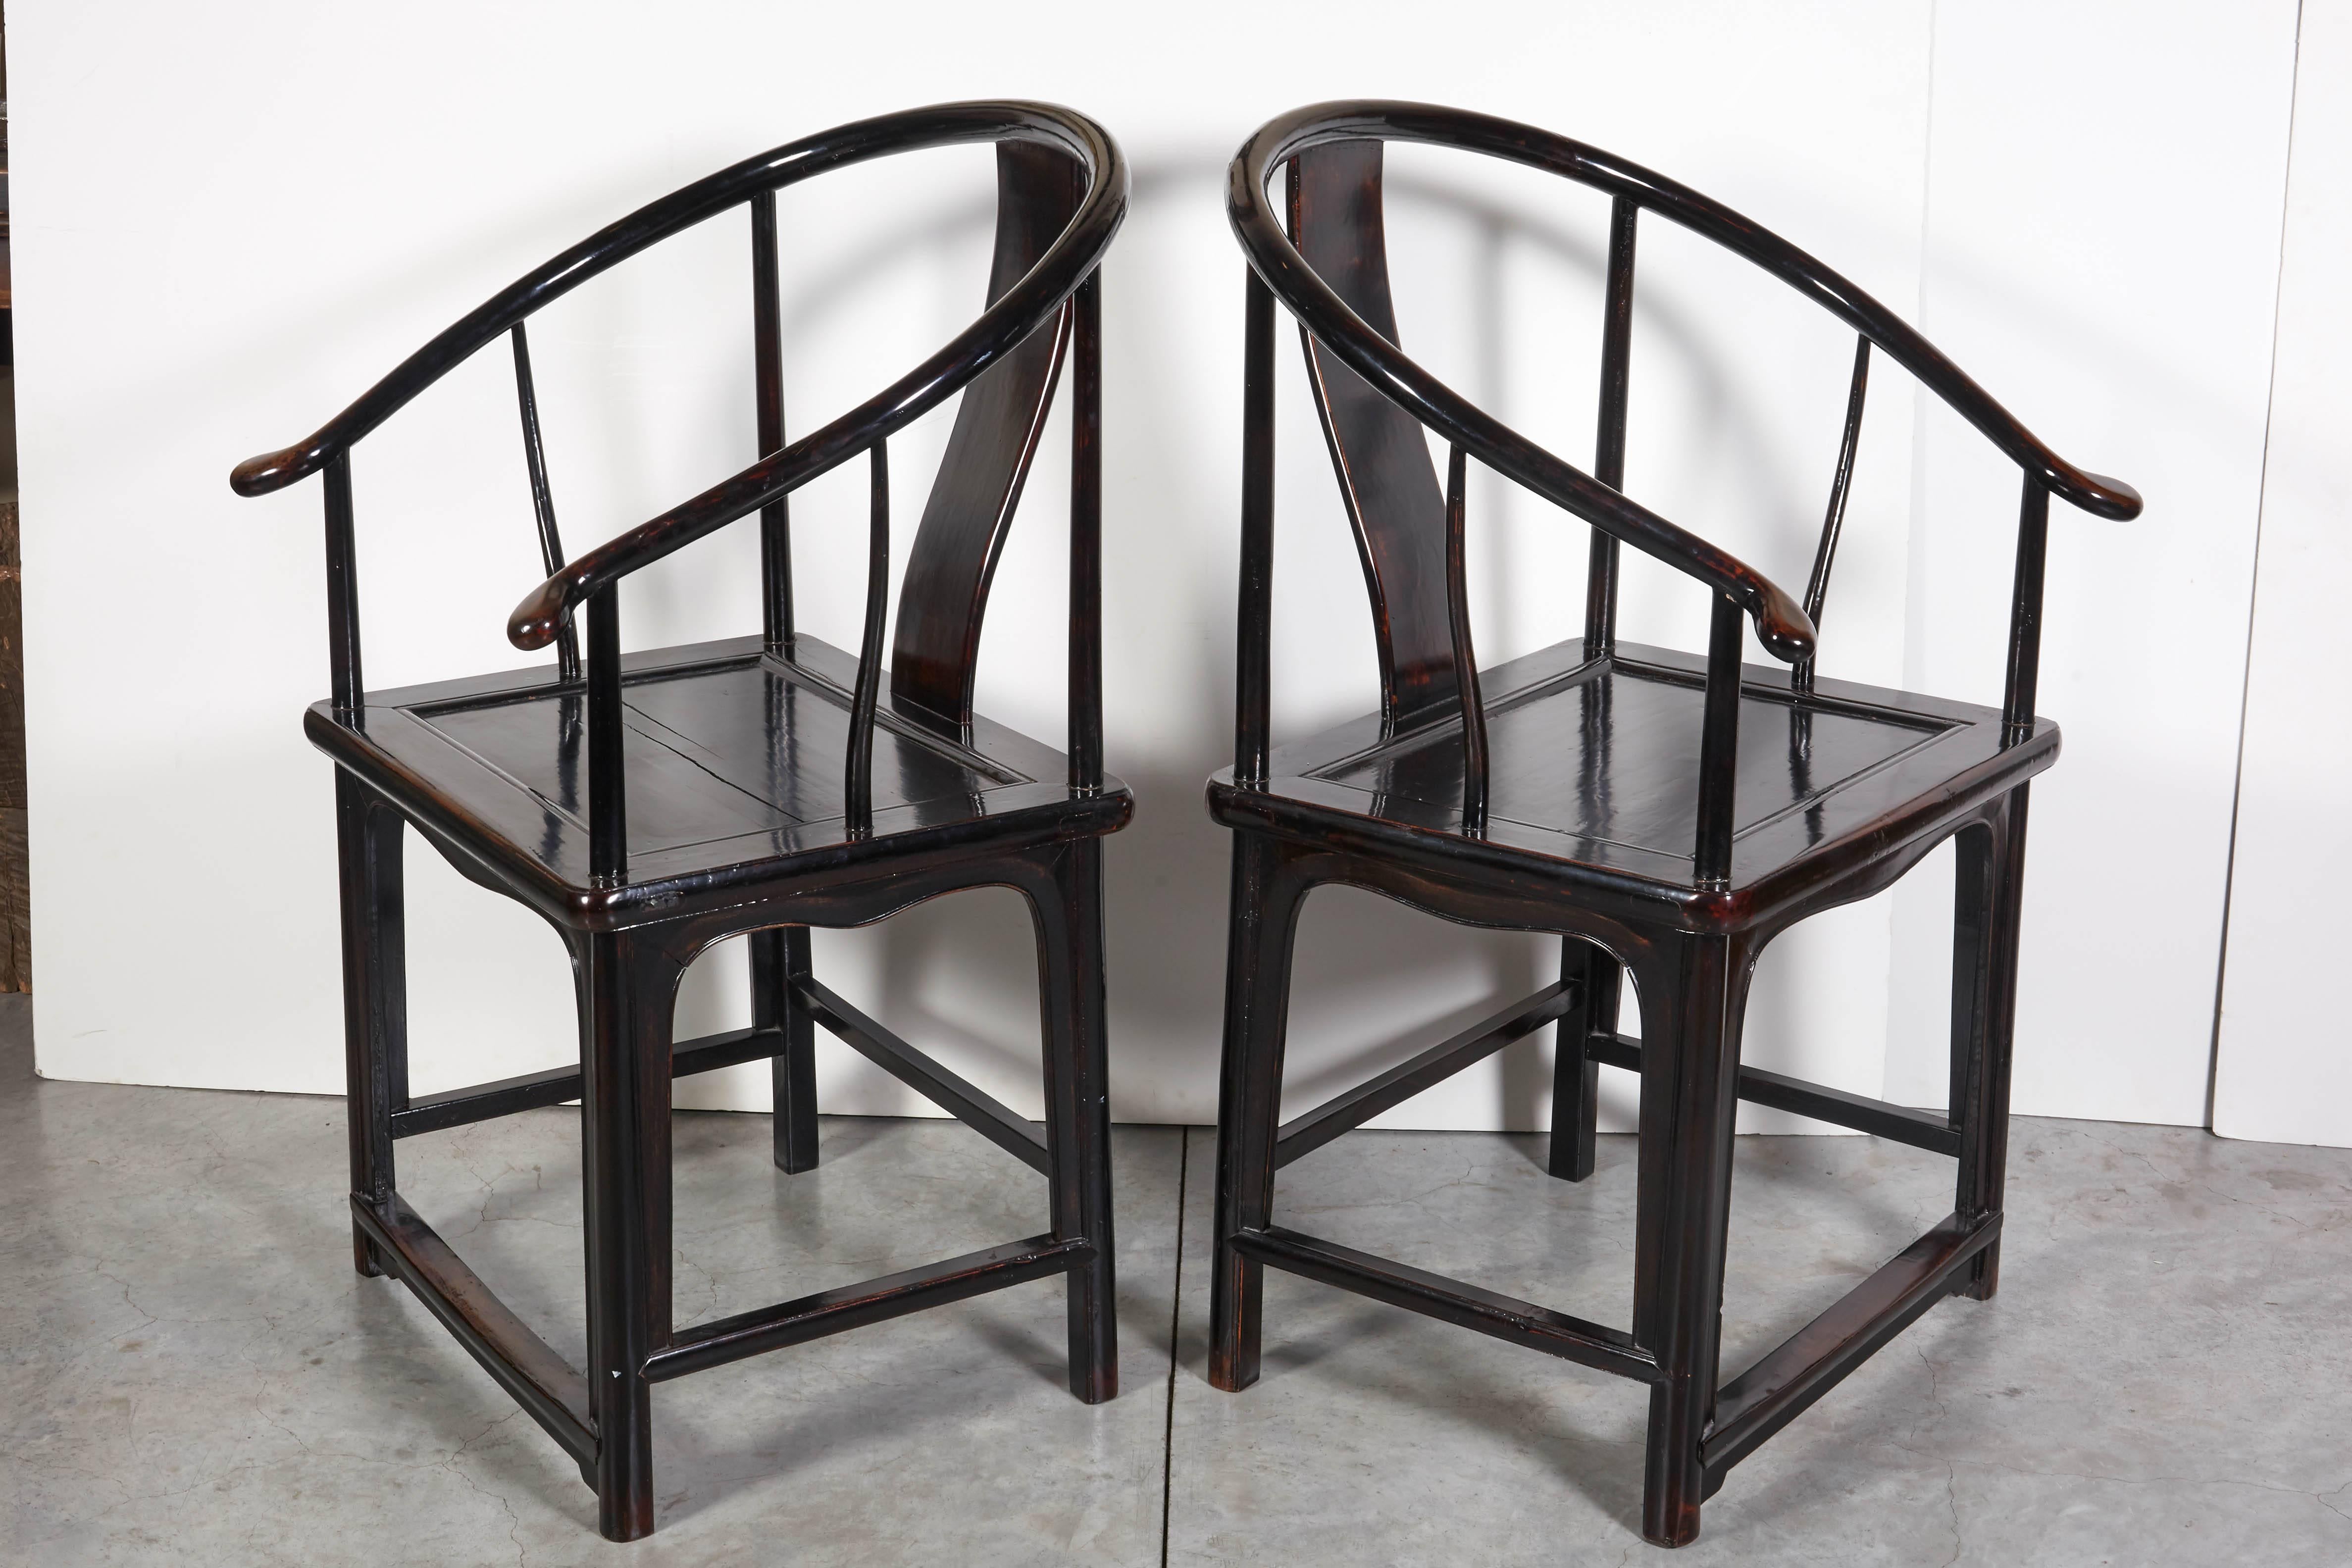 Pair of Antique Chinese Lacquer Horseshoe Back Chairs In Good Condition For Sale In New York, NY